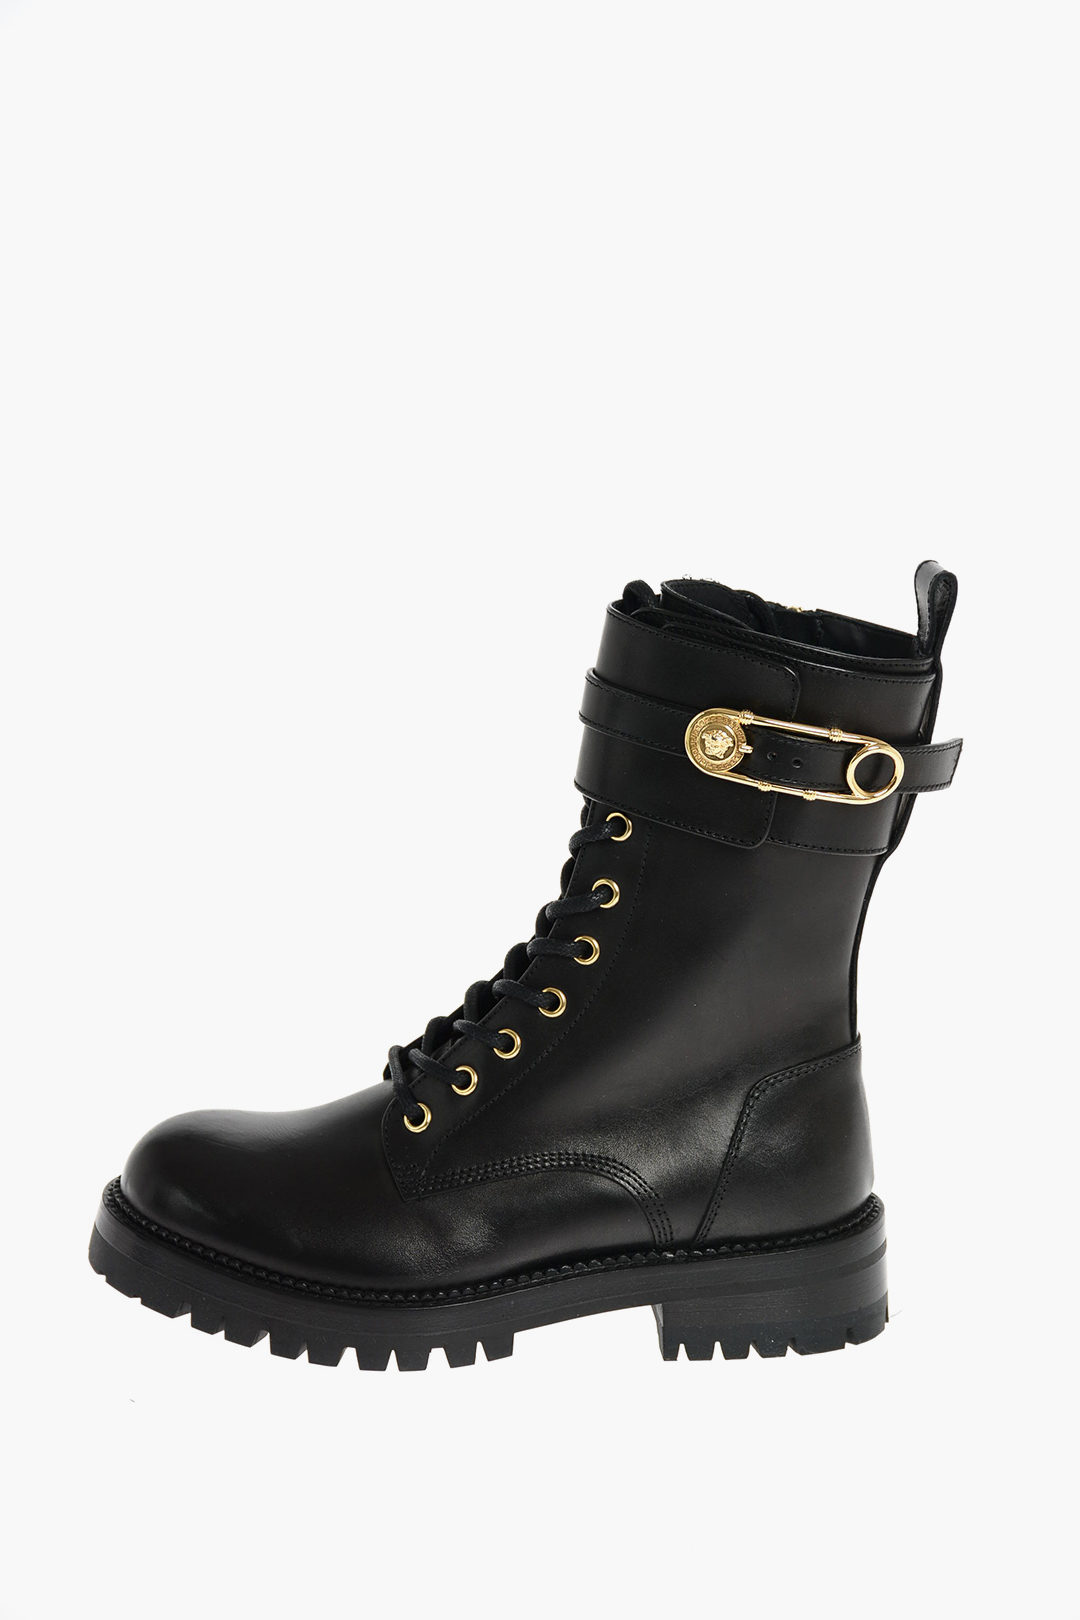 Versace Leather Safety Pin Combat Boots women - Glamood Outlet